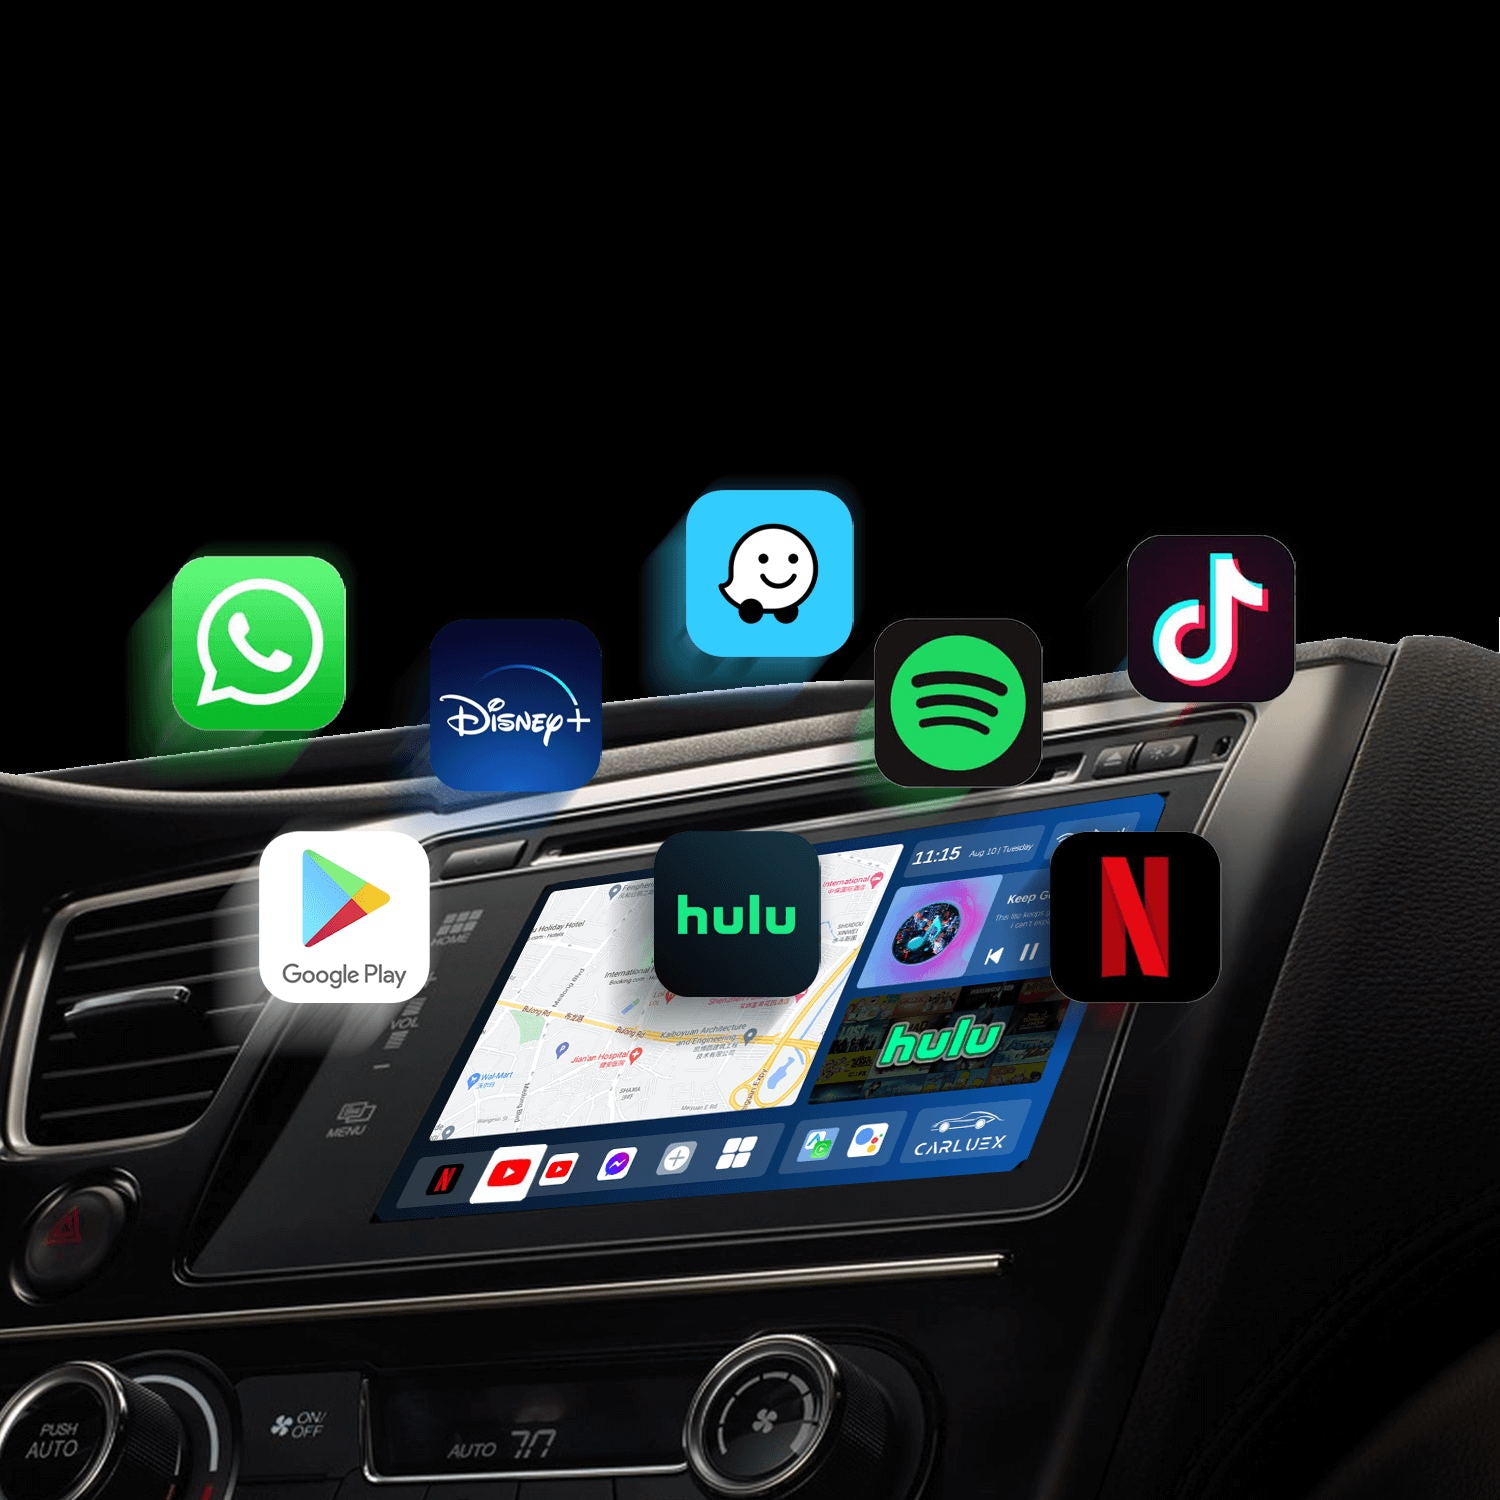 CARLUEX PRO PLUS ADVANCE ANDROID 13.0 SYSTEM | Wireless CarPlay & Android Auto Adapter Car Box